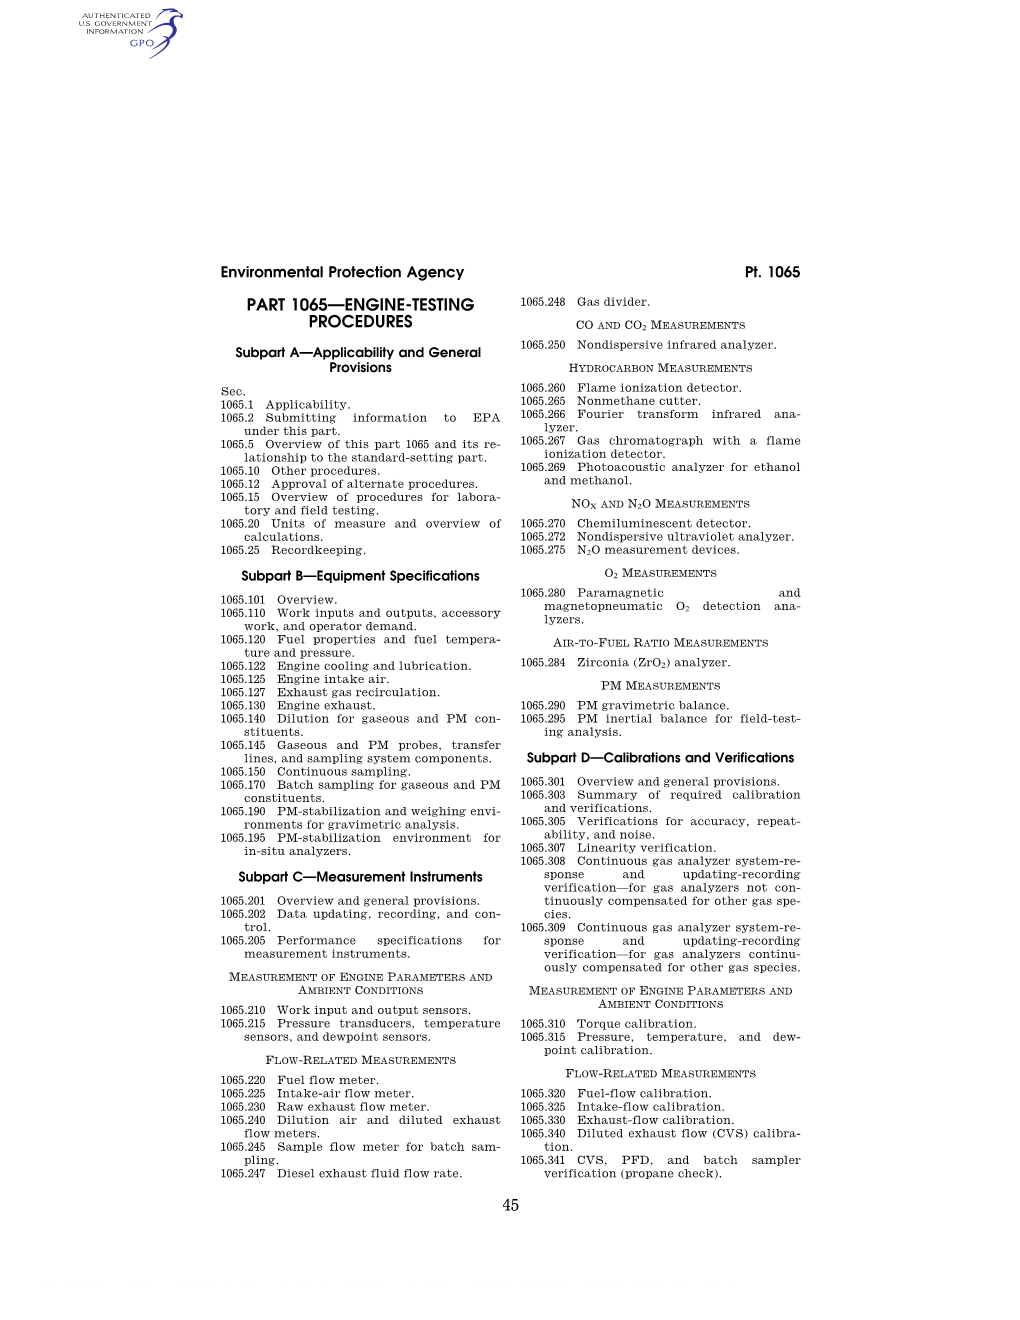 239 Subpart H—Engine Fluids, Test Fuels, Analytical Gases and Other